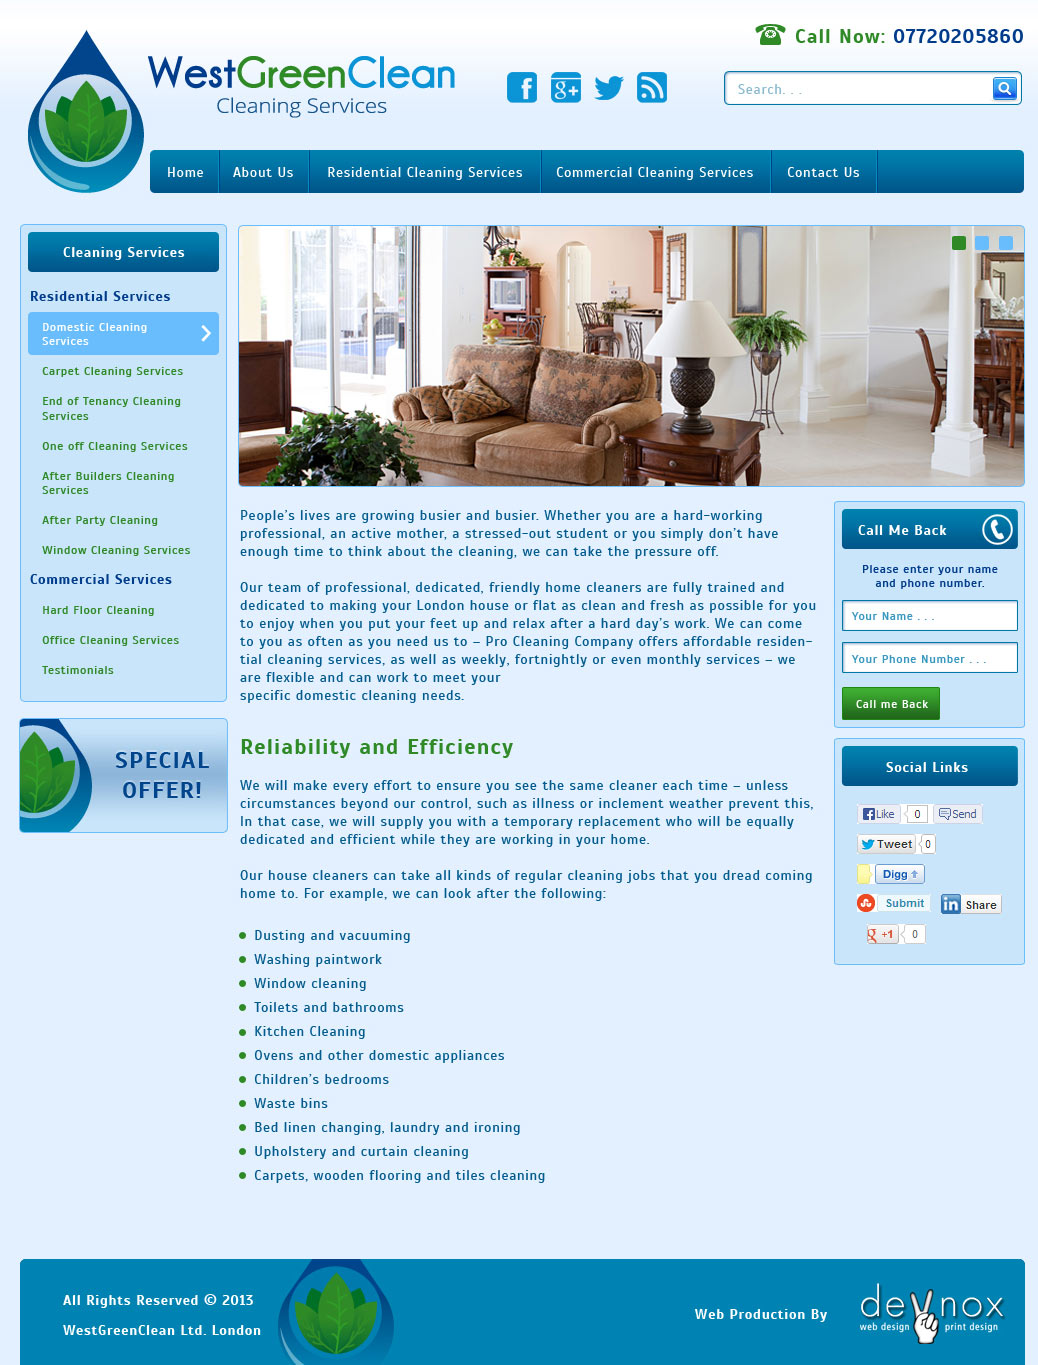 Website of WestGreenClean - Cleaning services in London